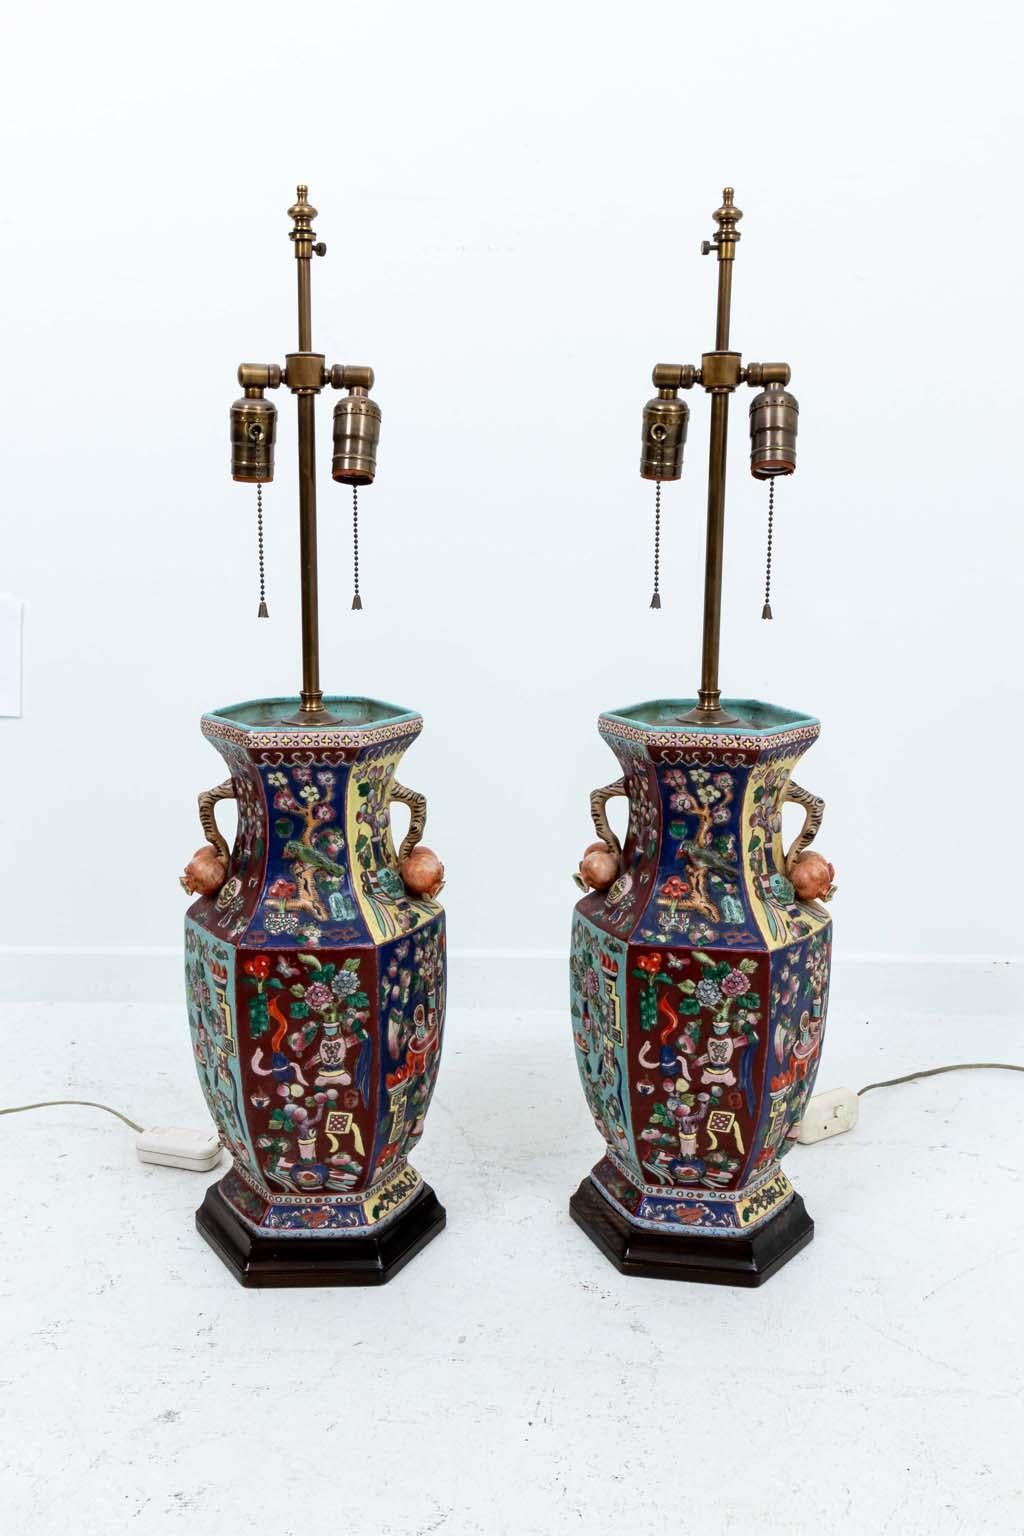 Decorative 19th century vibrant colored table lamps. Hexagonal in shape. 
